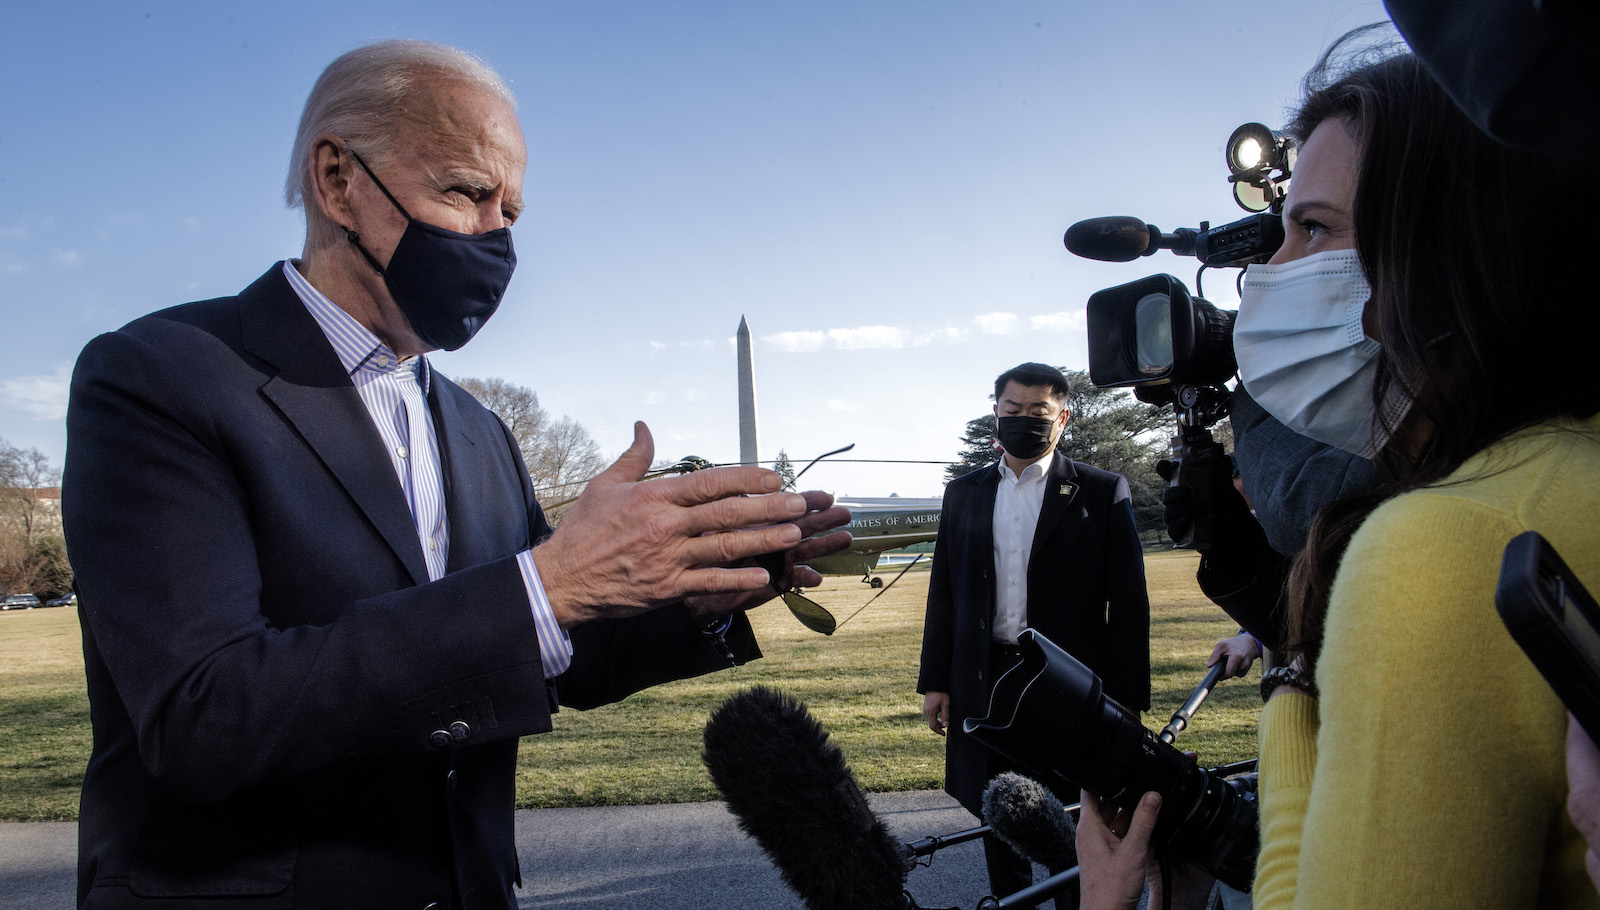 President Joe Biden returns after spending the weeked at Camp David to the White House, on March 21 in Washington, DC.